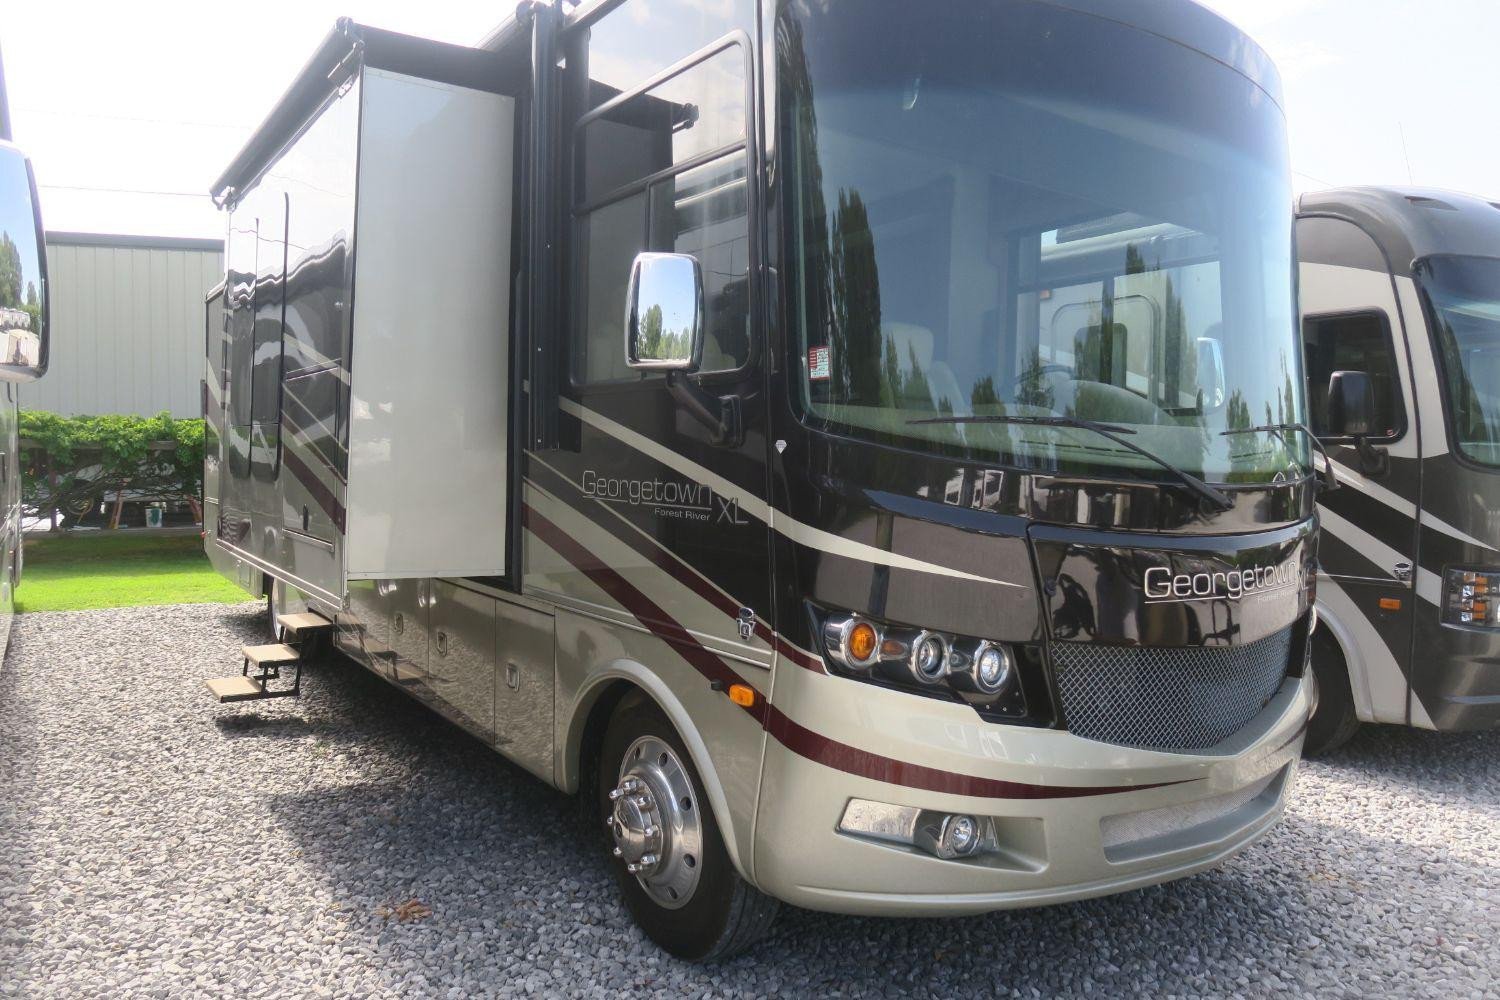 USED 2015 GEORGETOWN 378XL - Overview | Berryland Campers